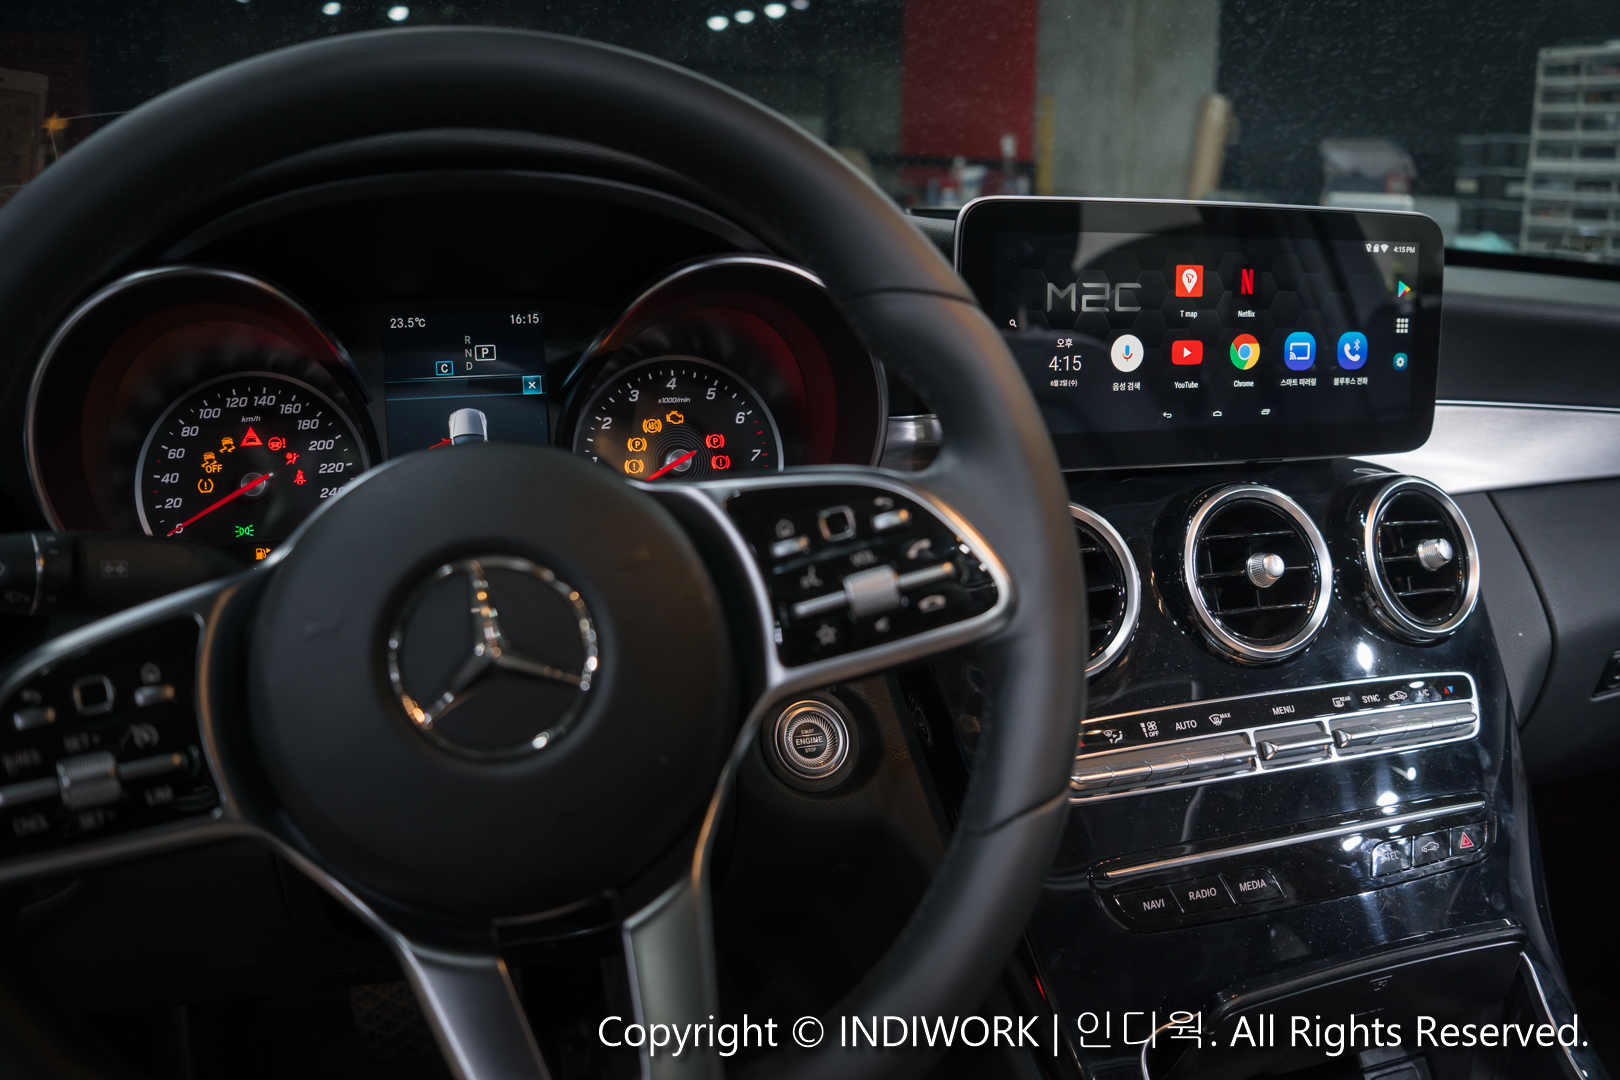 Super High Resolution AndroidCarPC for 2019 C-Class*facelift NTG6 "M2C-200 PLUS"